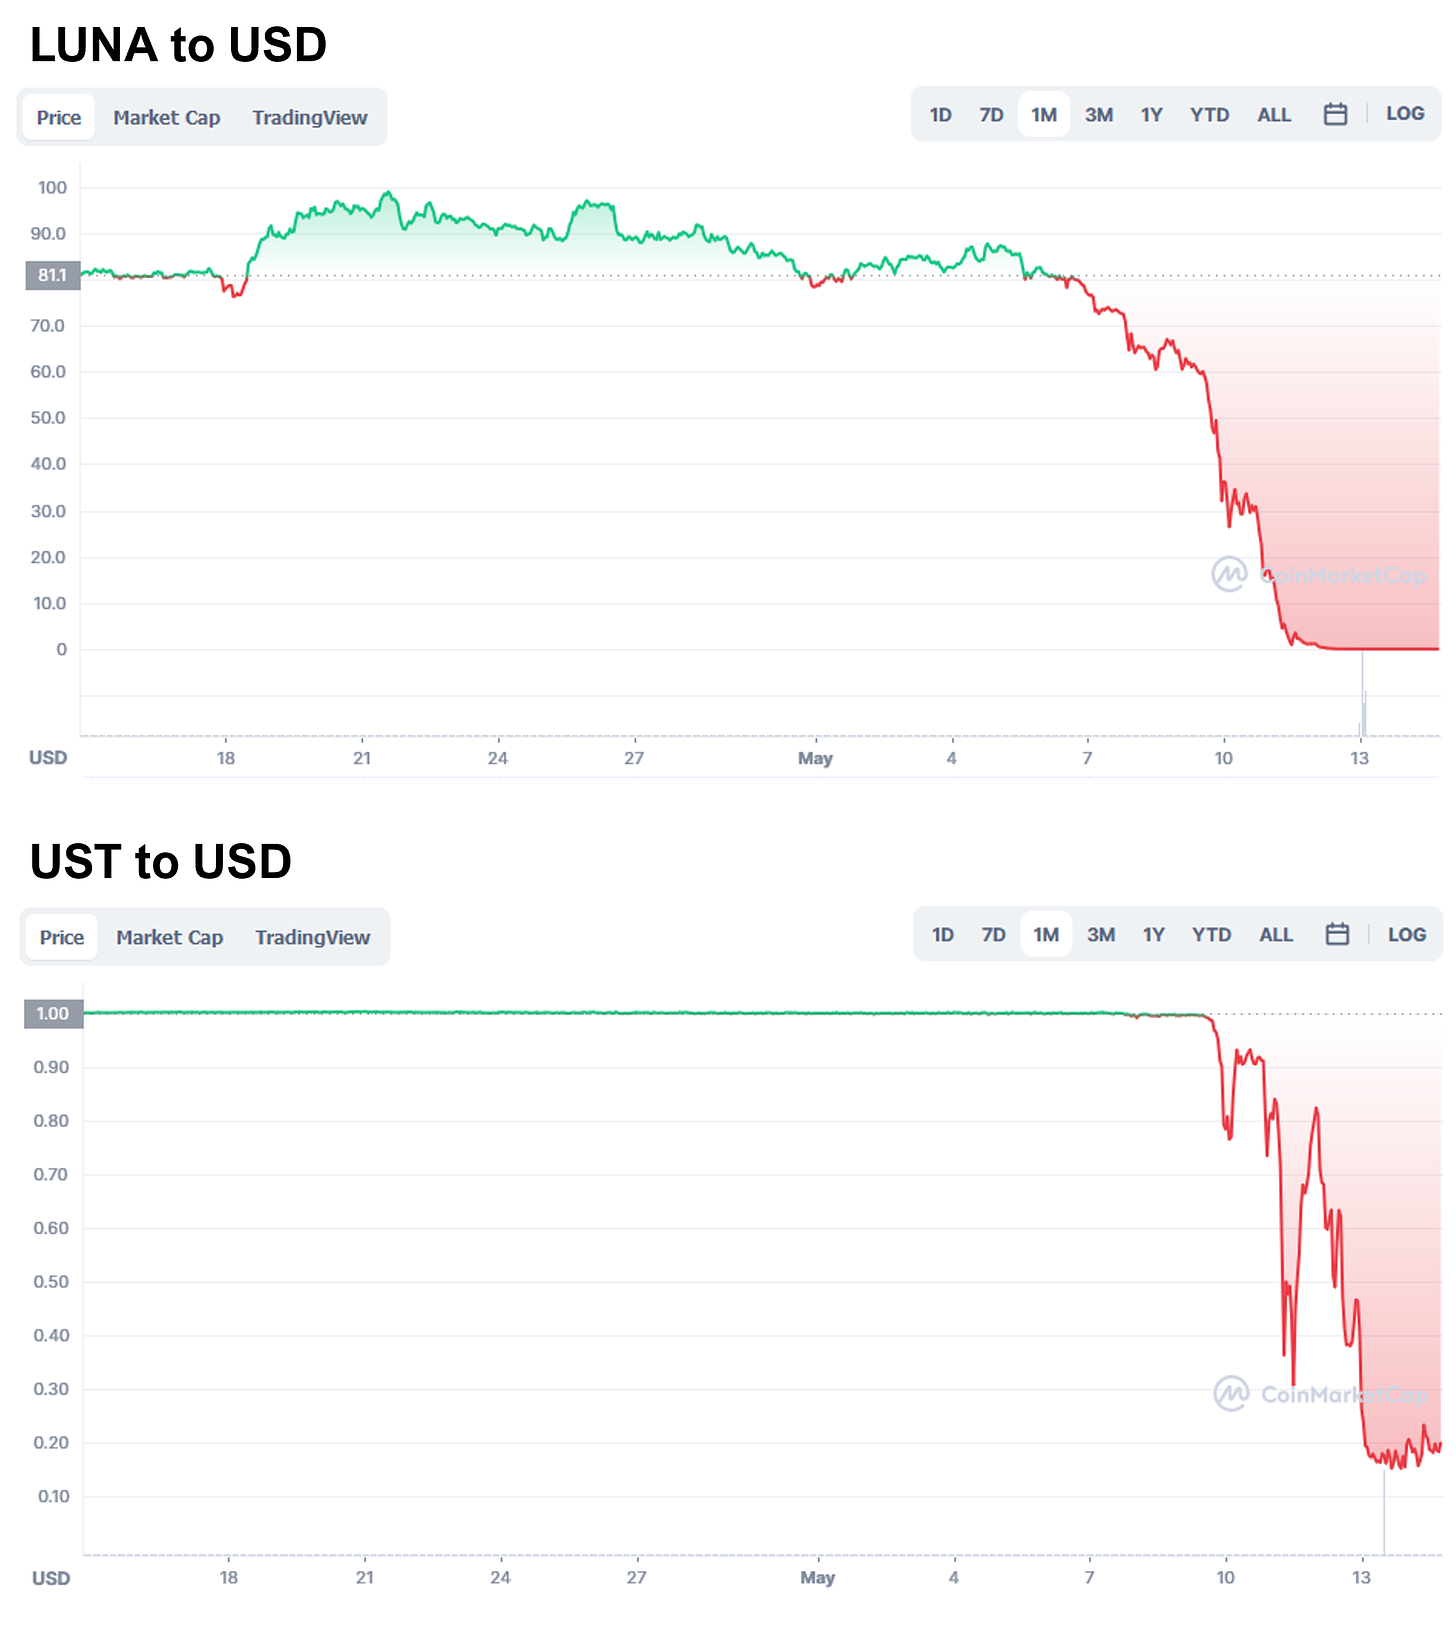 Price chart of Luna to USD and UST to USD